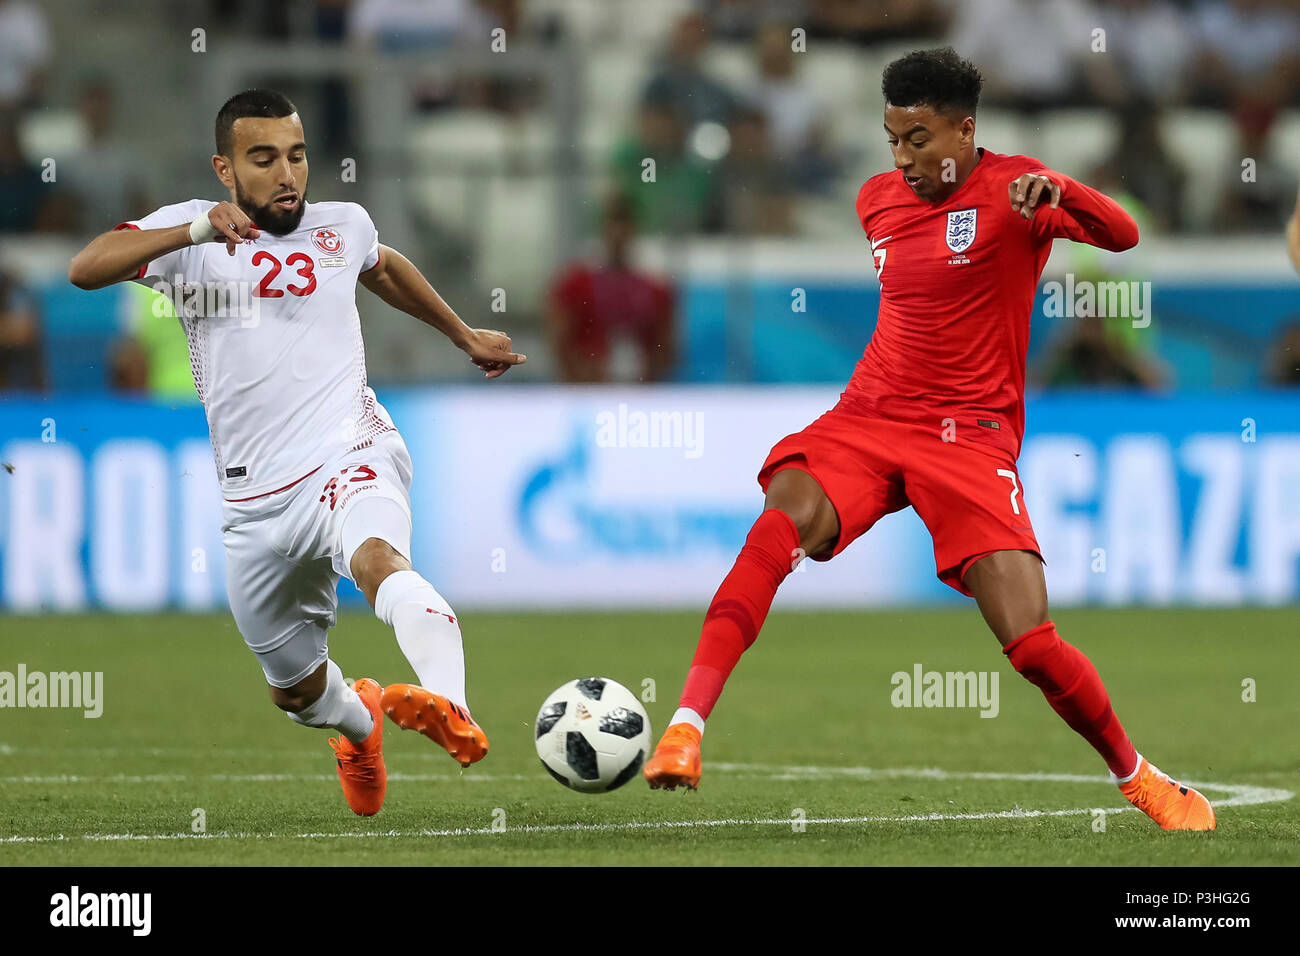 Volgograd, Russia. 18th June, 2018. Jesse Lingard of England and Naim Sliti of Tunisia during the 2018 FIFA World Cup Group G match between Tunisia and England at Volgograd Arena on June 18th 2018 in Volgograd, Russia.  Credit: PHC Images/Alamy Live News Stock Photo